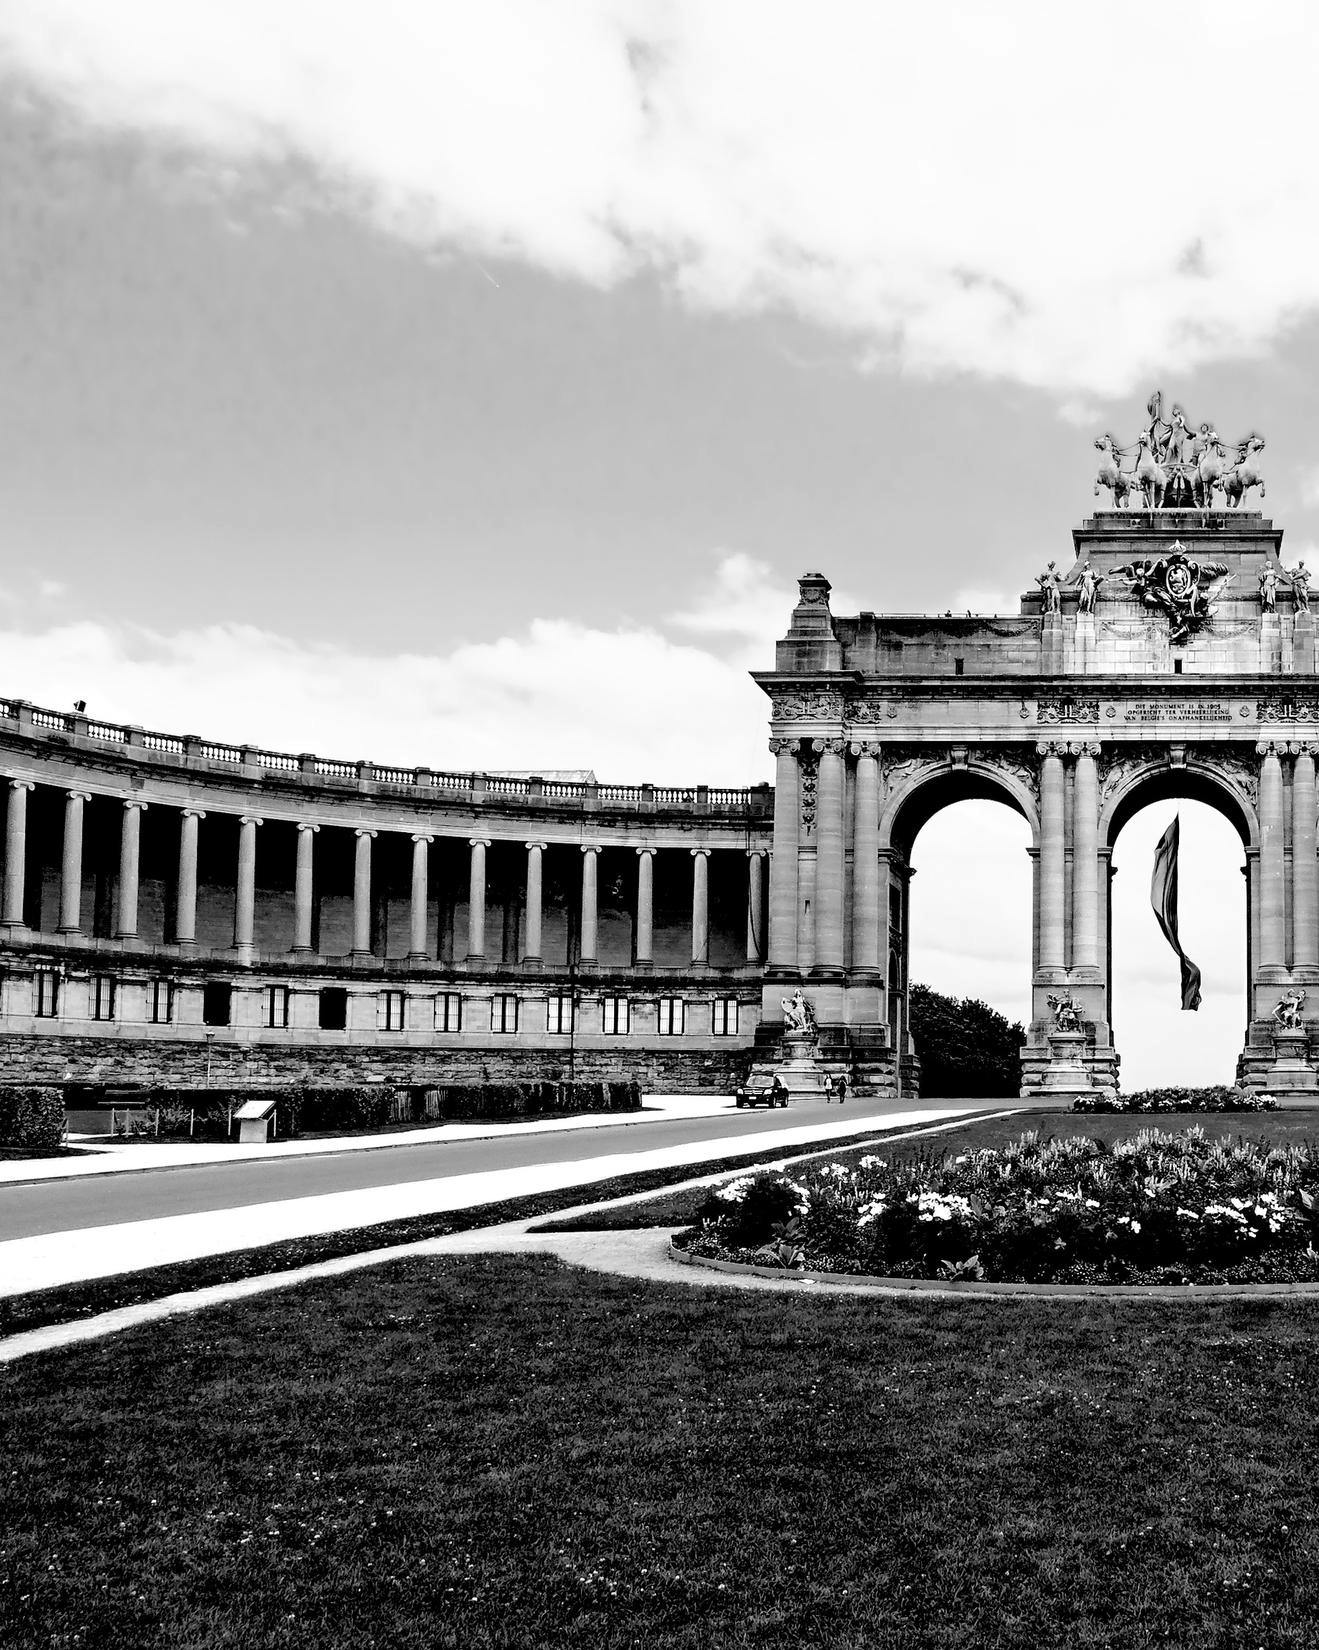 Black and white image showing a monumental arch and garden in Belgium